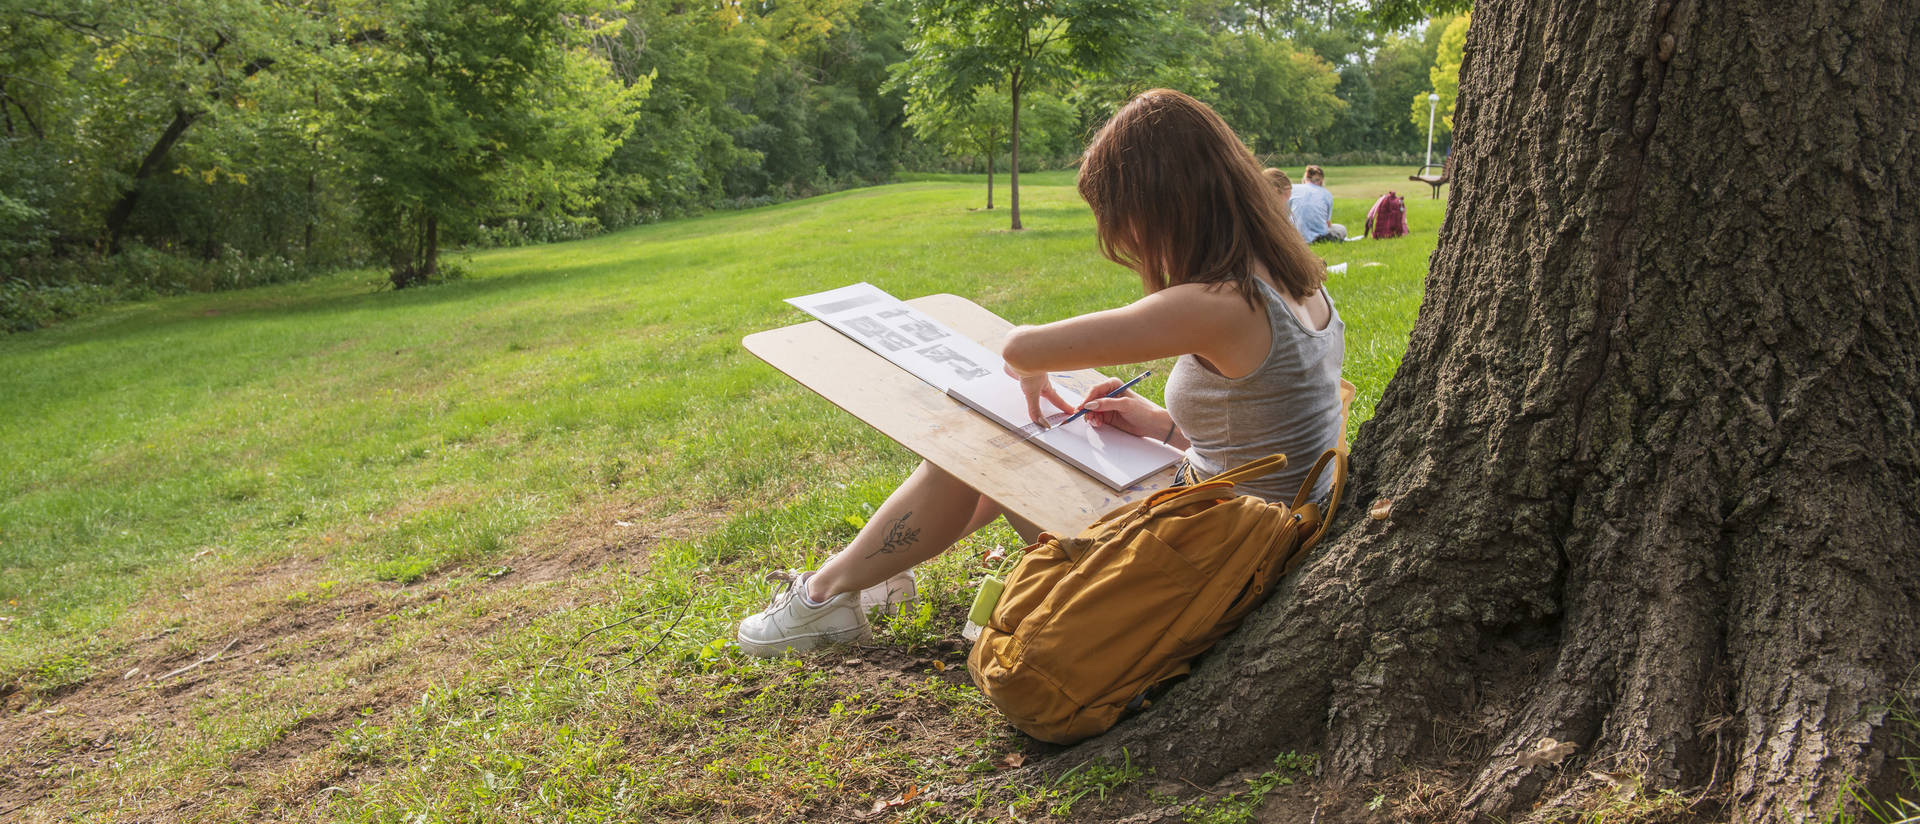 An art student draws on a clipboard next to a tree on campus.